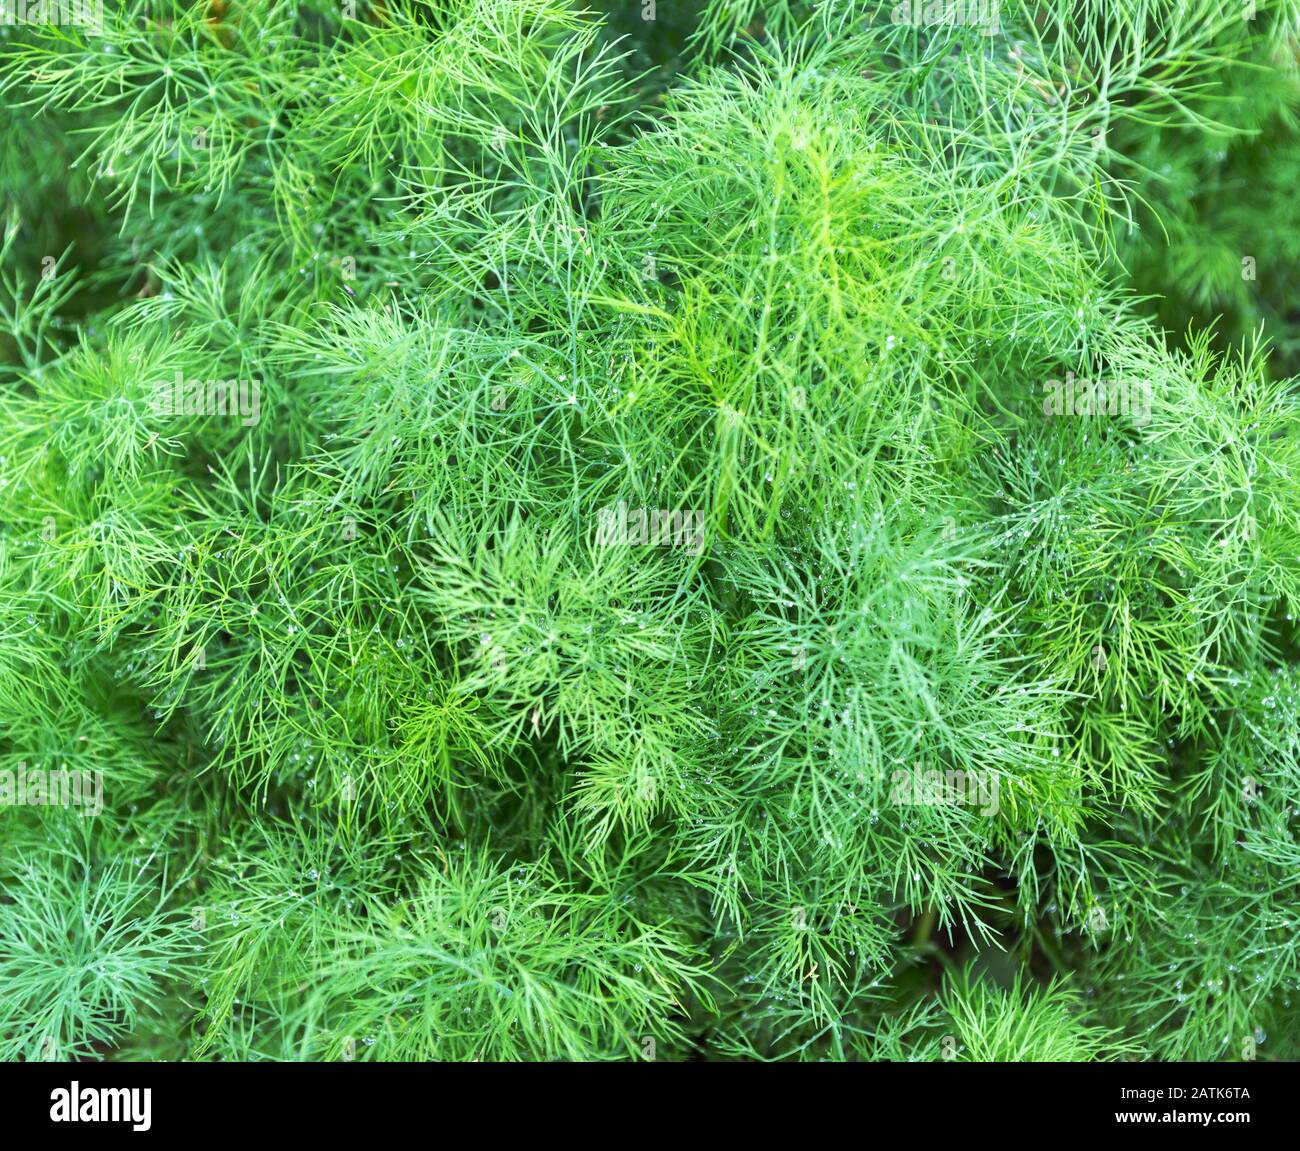 Dill plant in the garden. Green background with dill. Fennel leaves. Green leaf background. Stock Photo